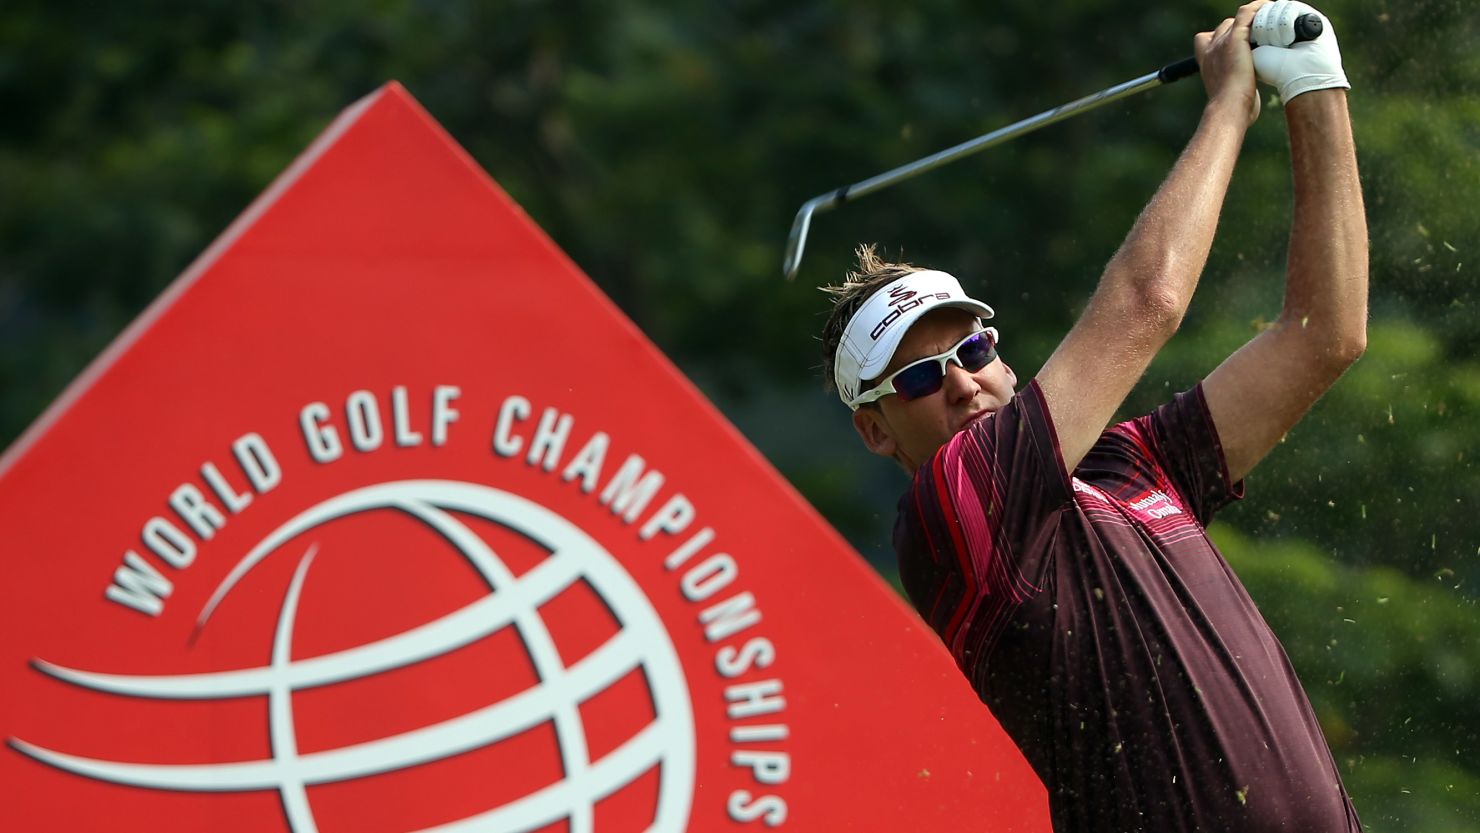 Ian Poulter claimed his second WGC title with victory at the HSBC Champions in Shenzhen on Sunday.